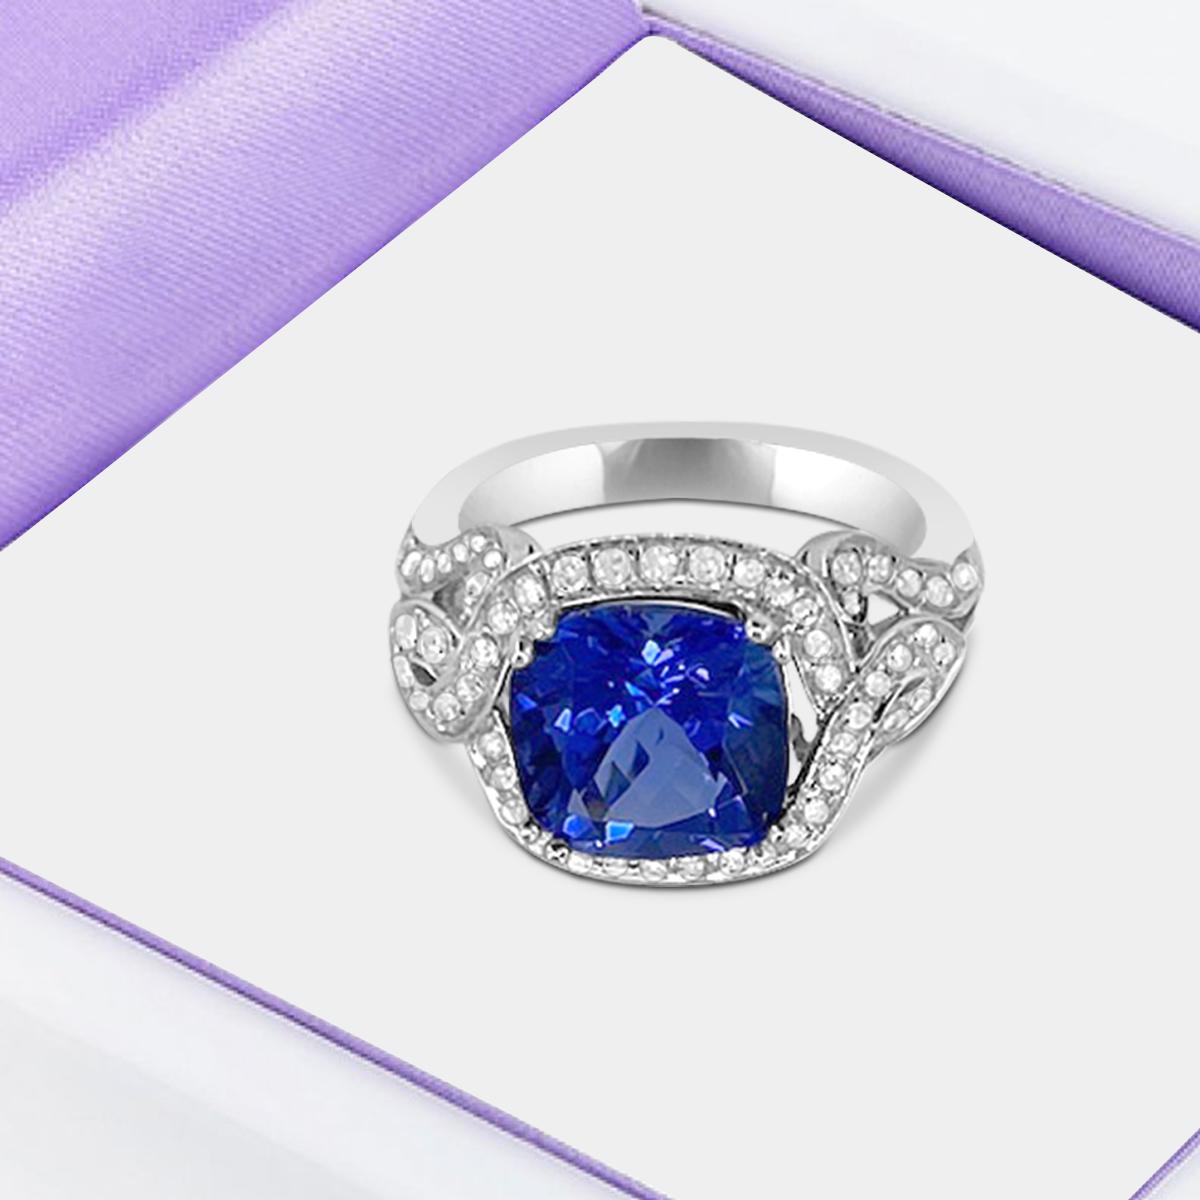 Modern 14K White Gold 4.33cts Tanzanite and Diamond Ring. Style# REN22639 For Sale